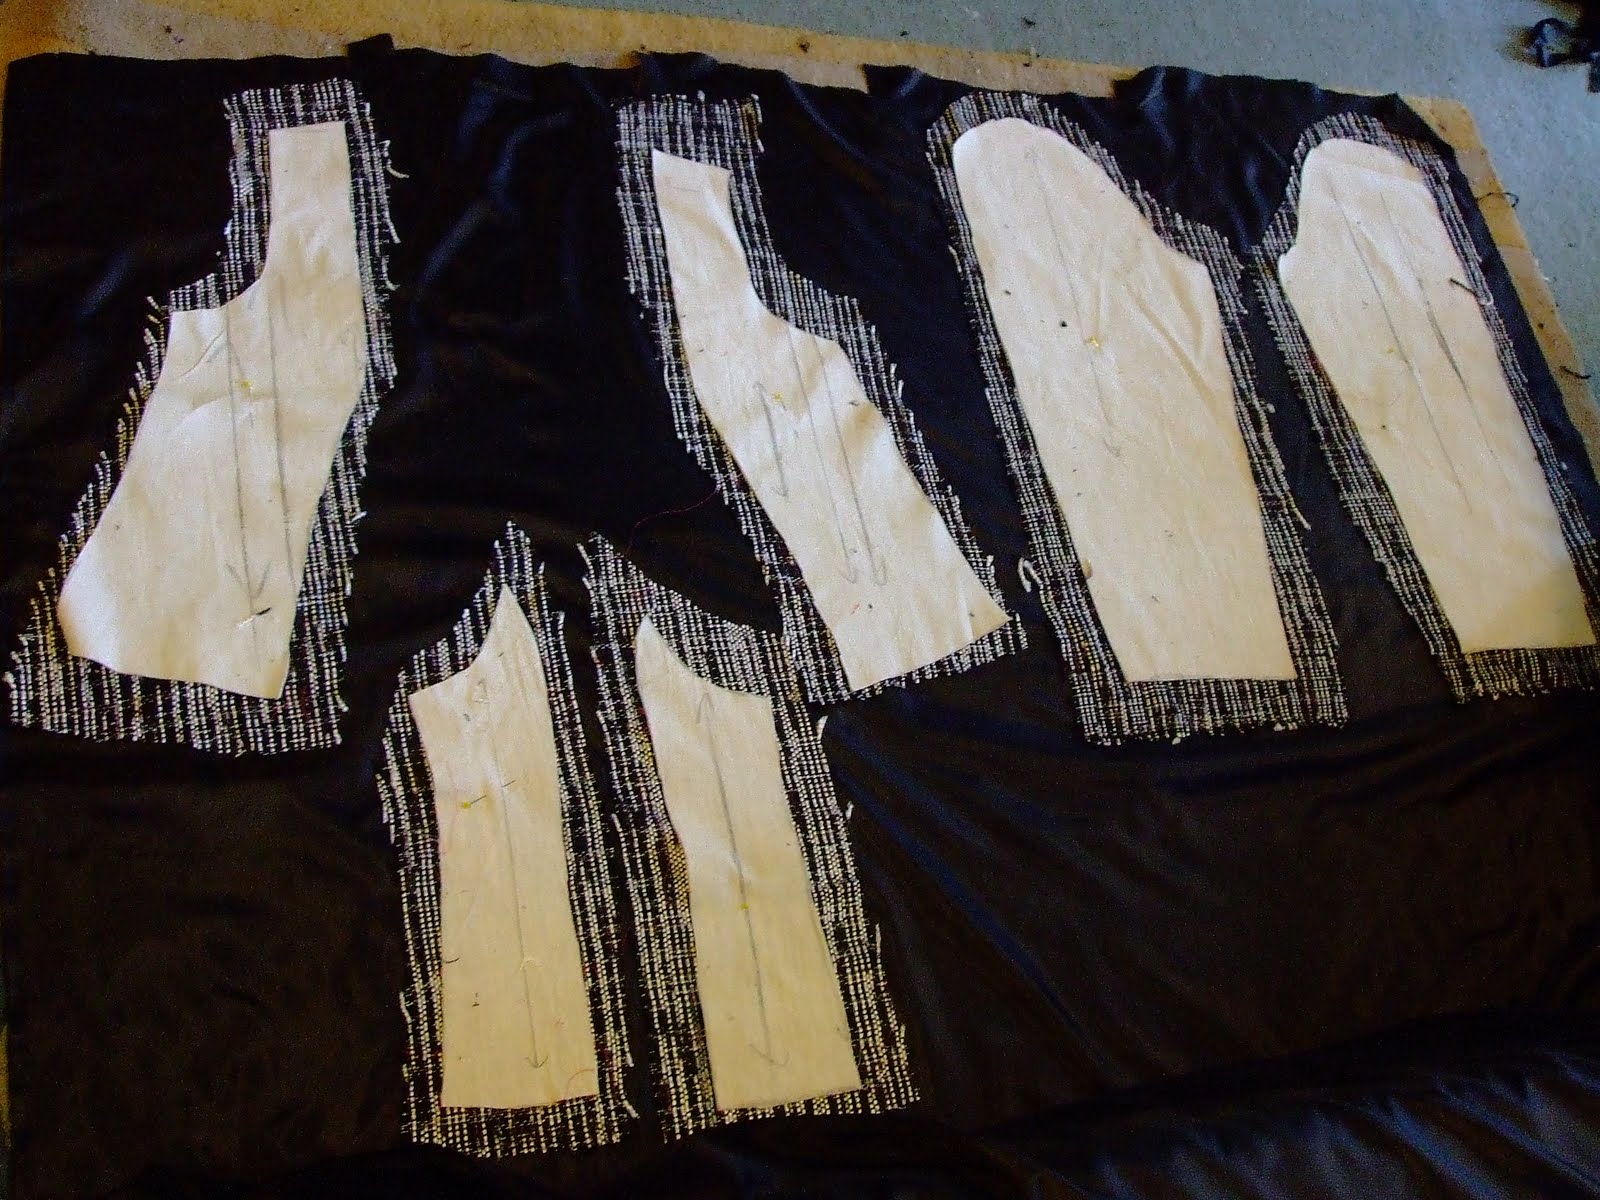 BeautyInTheLonely: Chanel Jacket tutorial 1 - cutting out and quilting